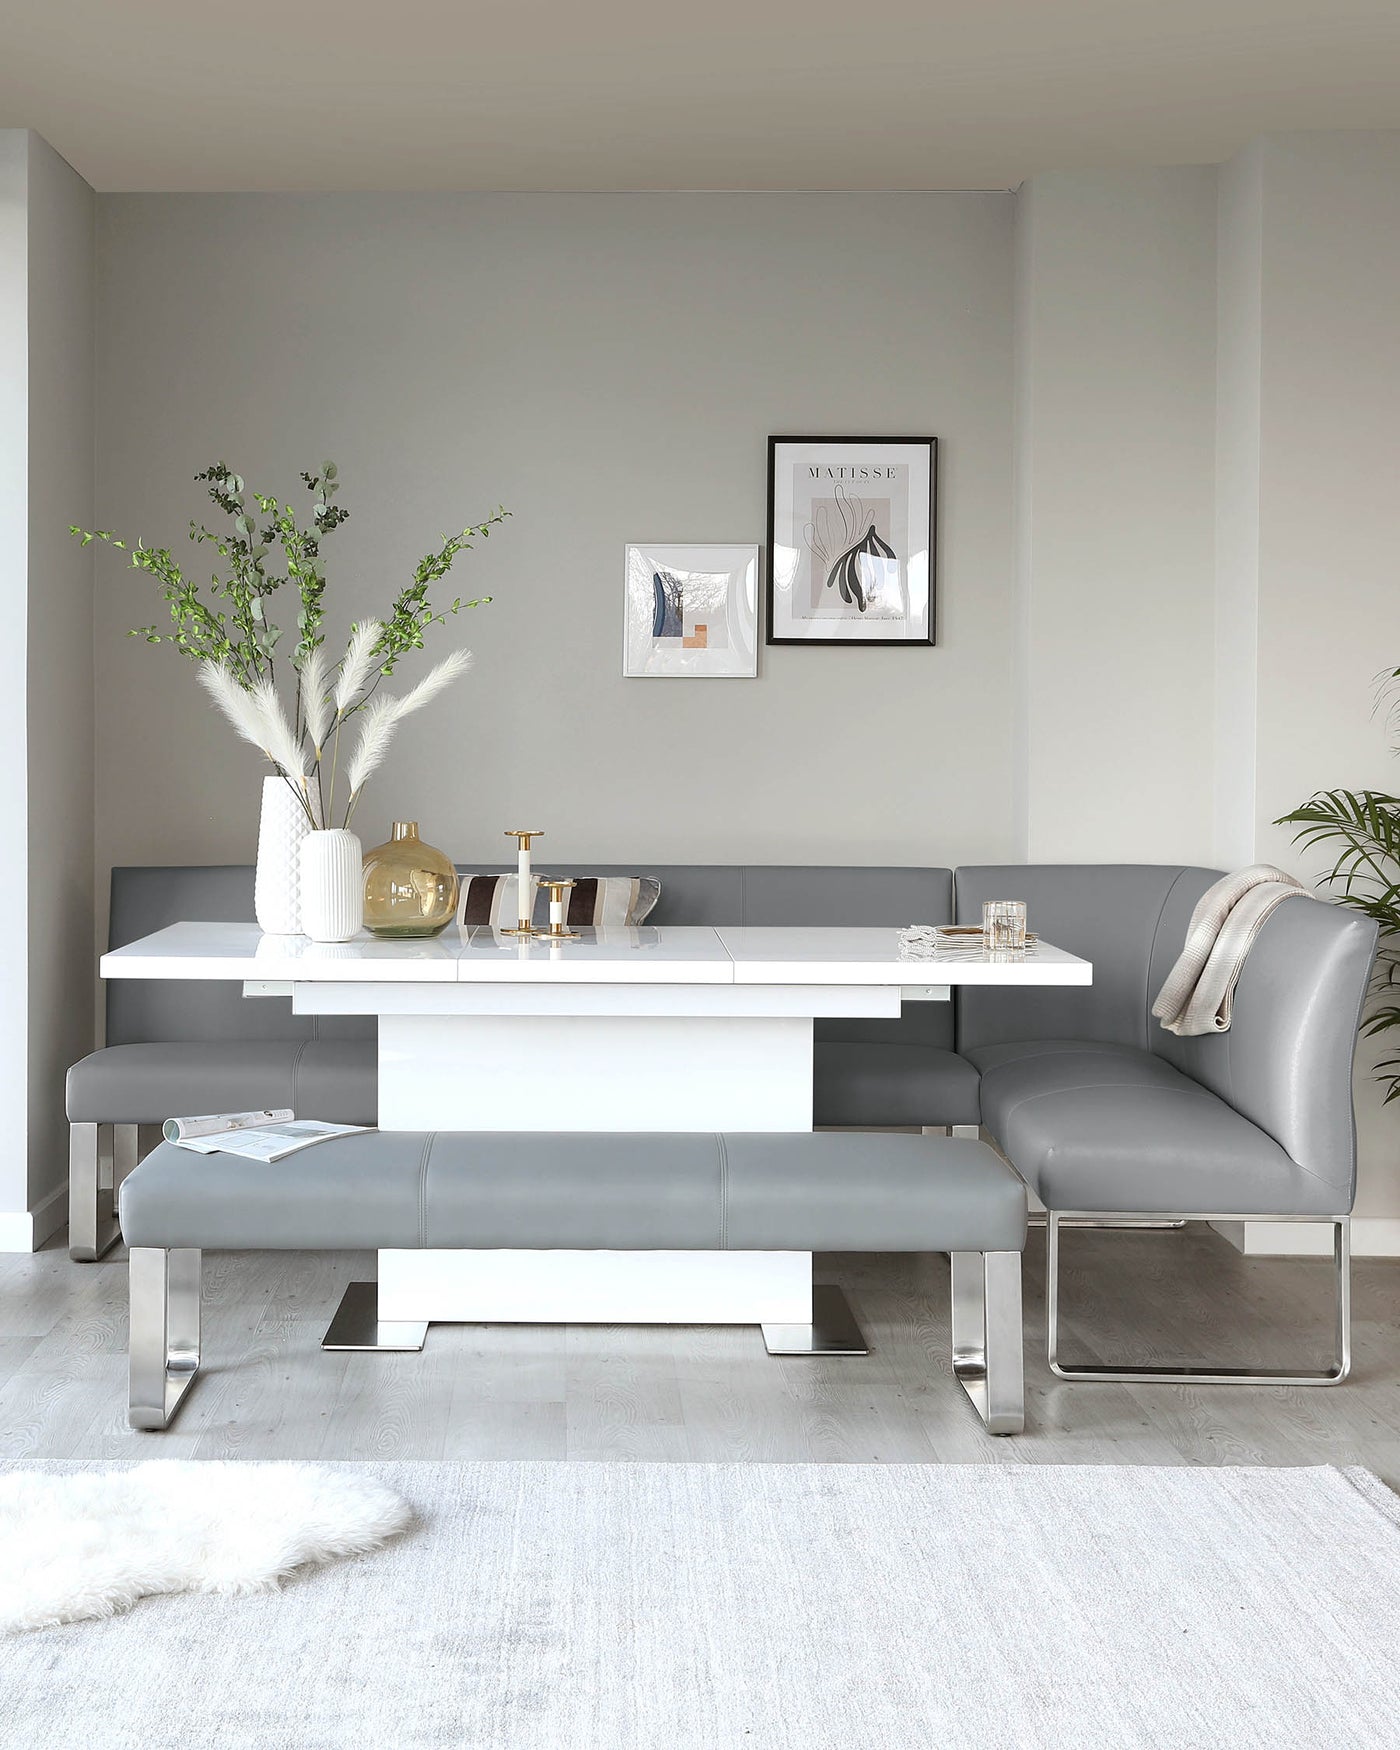 Modern dining area with a sleek white rectangular table featuring metallic accents, accompanied by a matching bench and a cantilevered grey upholstered chair with a stainless steel base. A plush white area rug lies underneath, complementing the contemporary aesthetic.